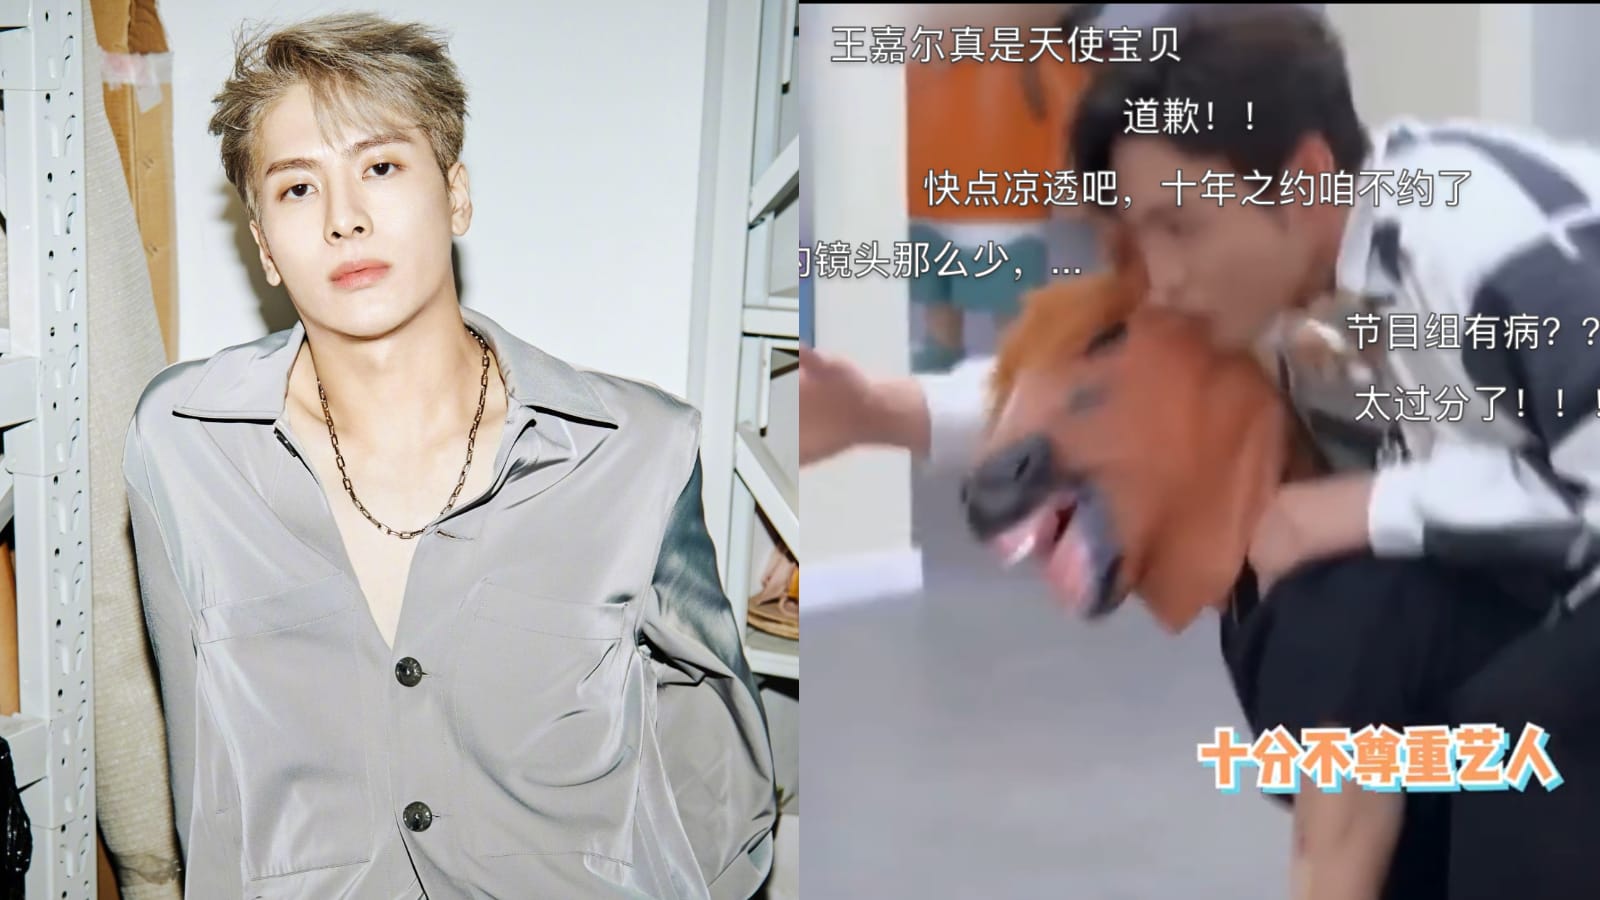 Jackson Wang “Ridden Like A Horse” On A Variety Show & His Fans Are Furious